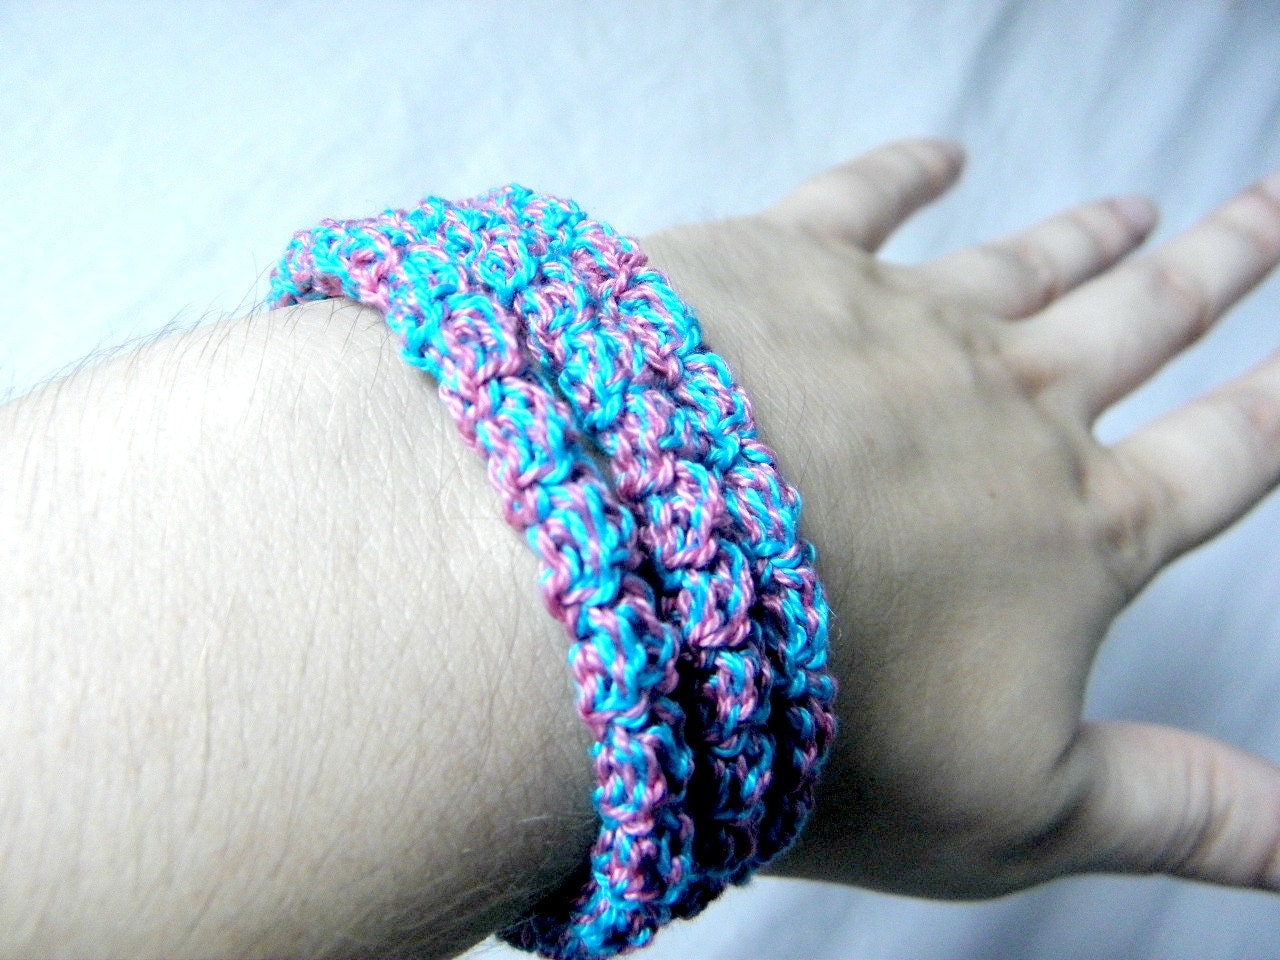 Crochet bracelet made of cotton blue and pink color